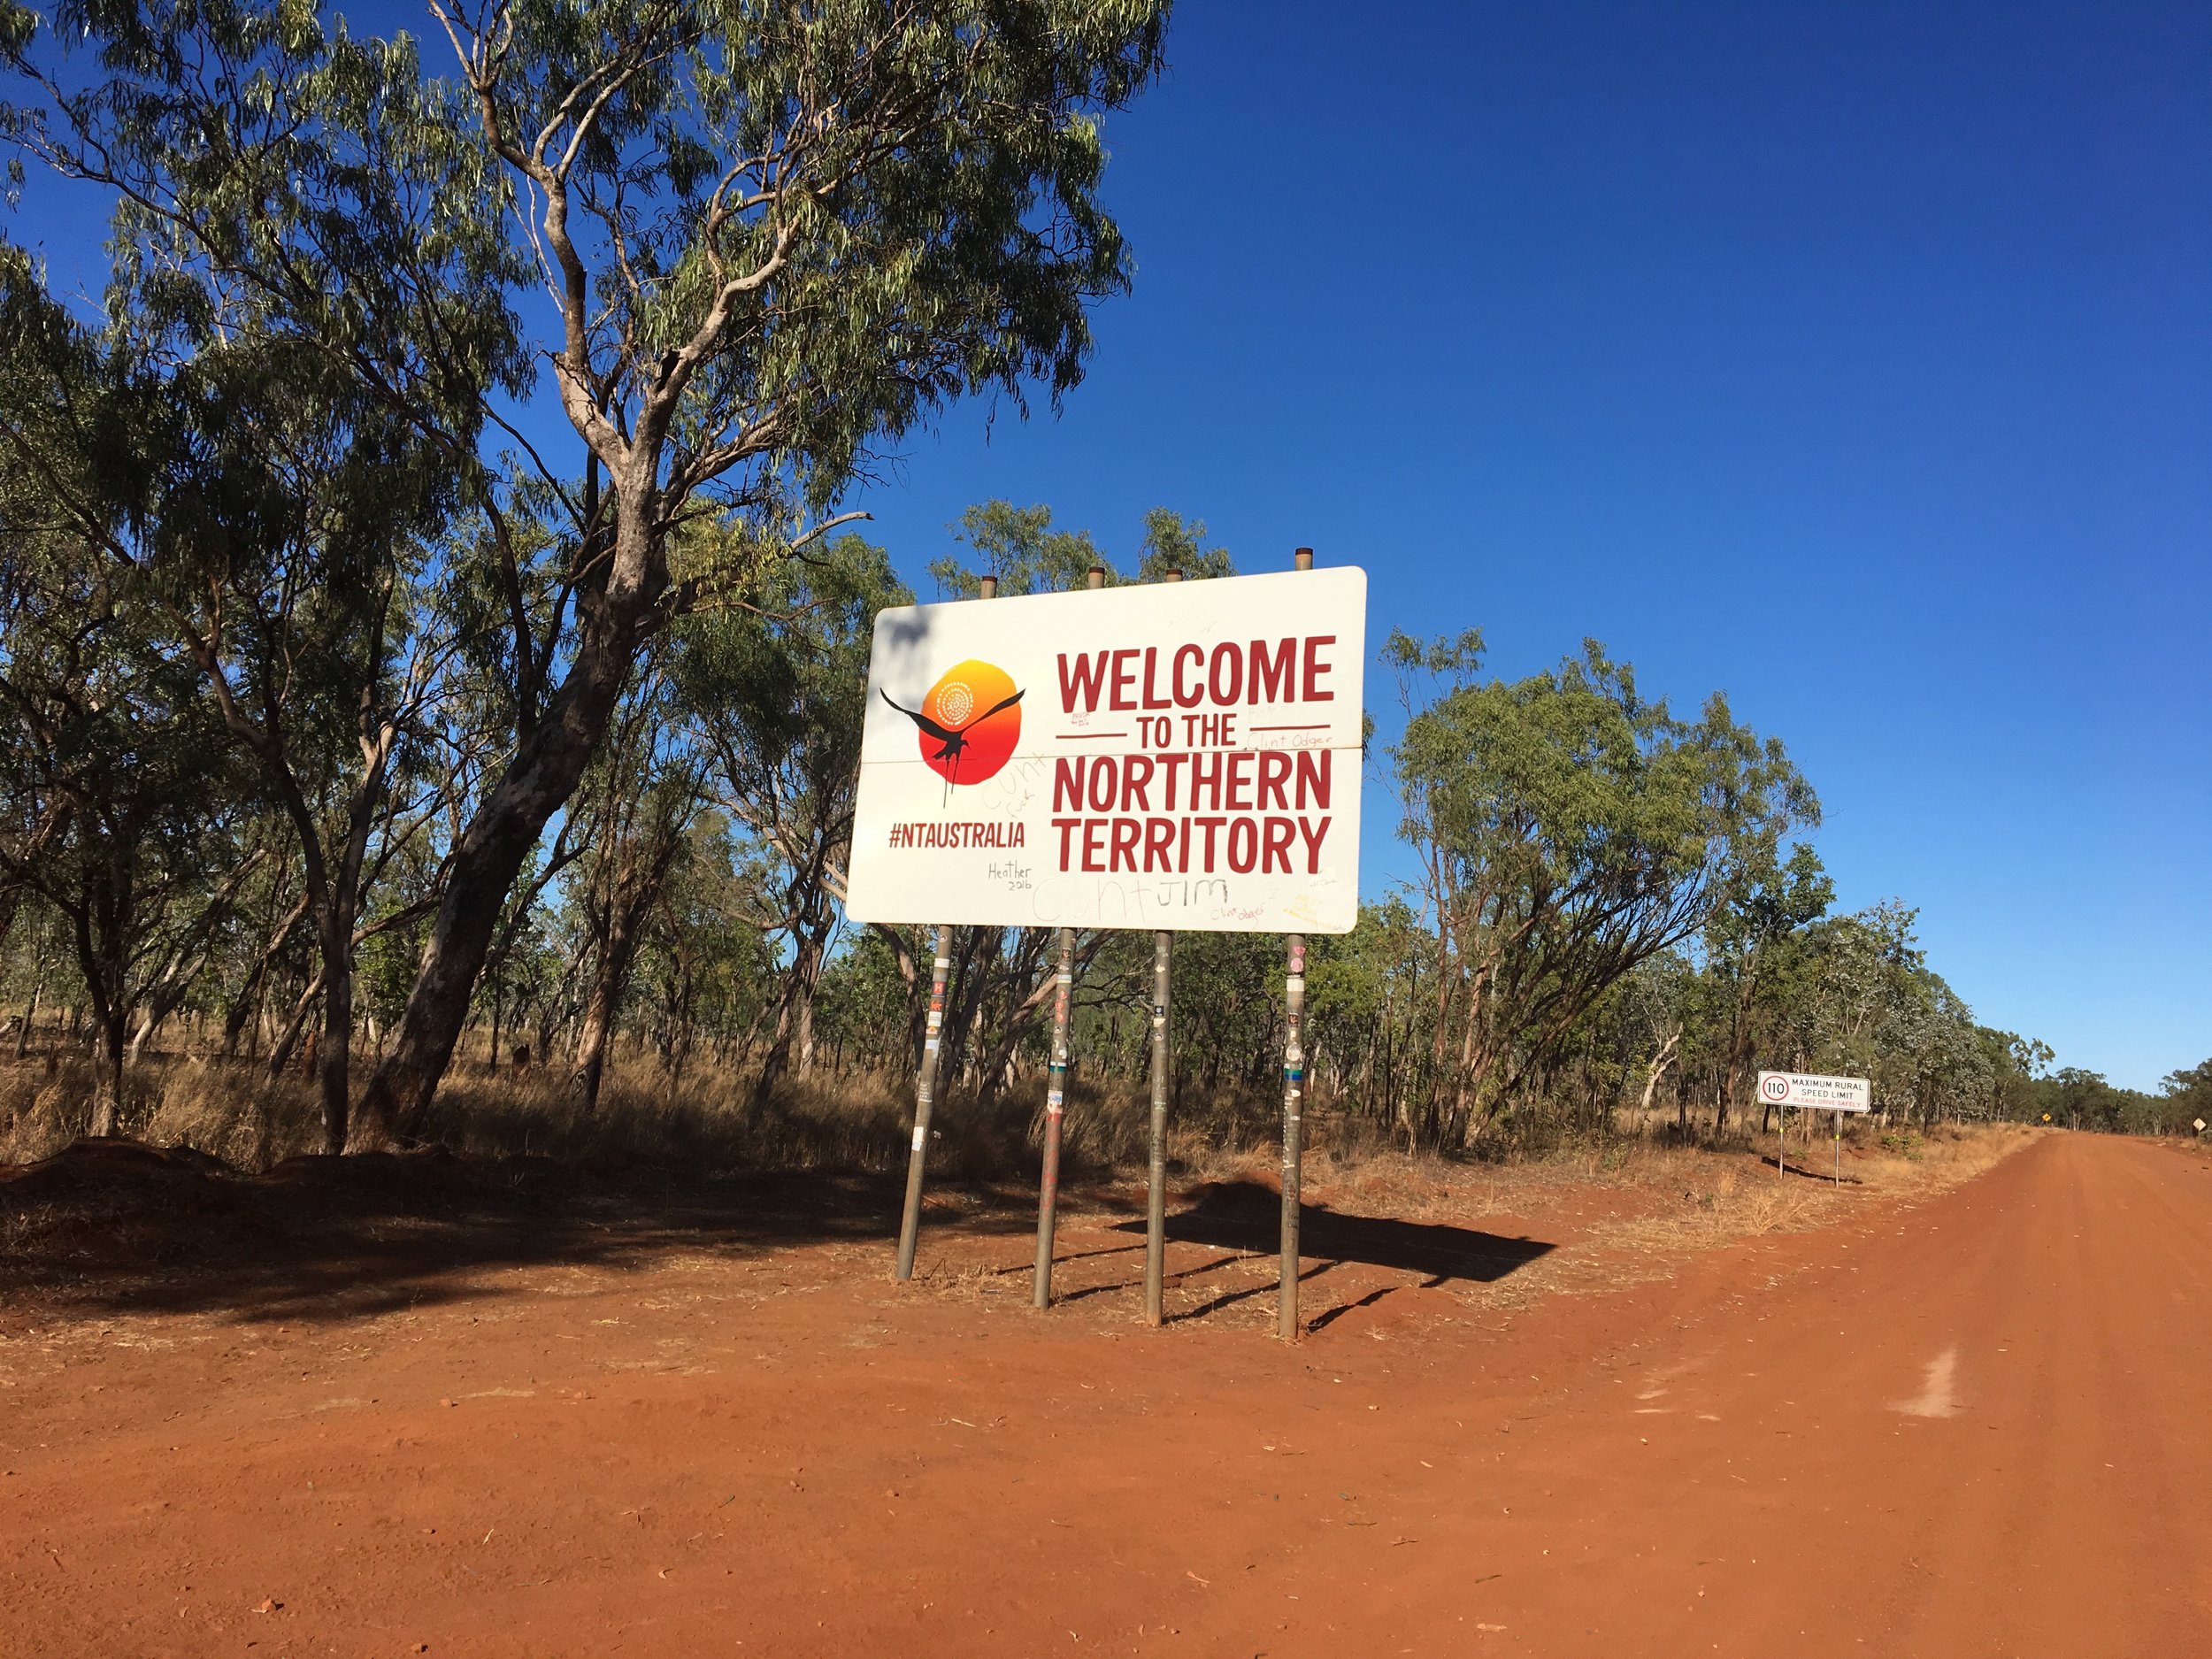 The Northern Territory border